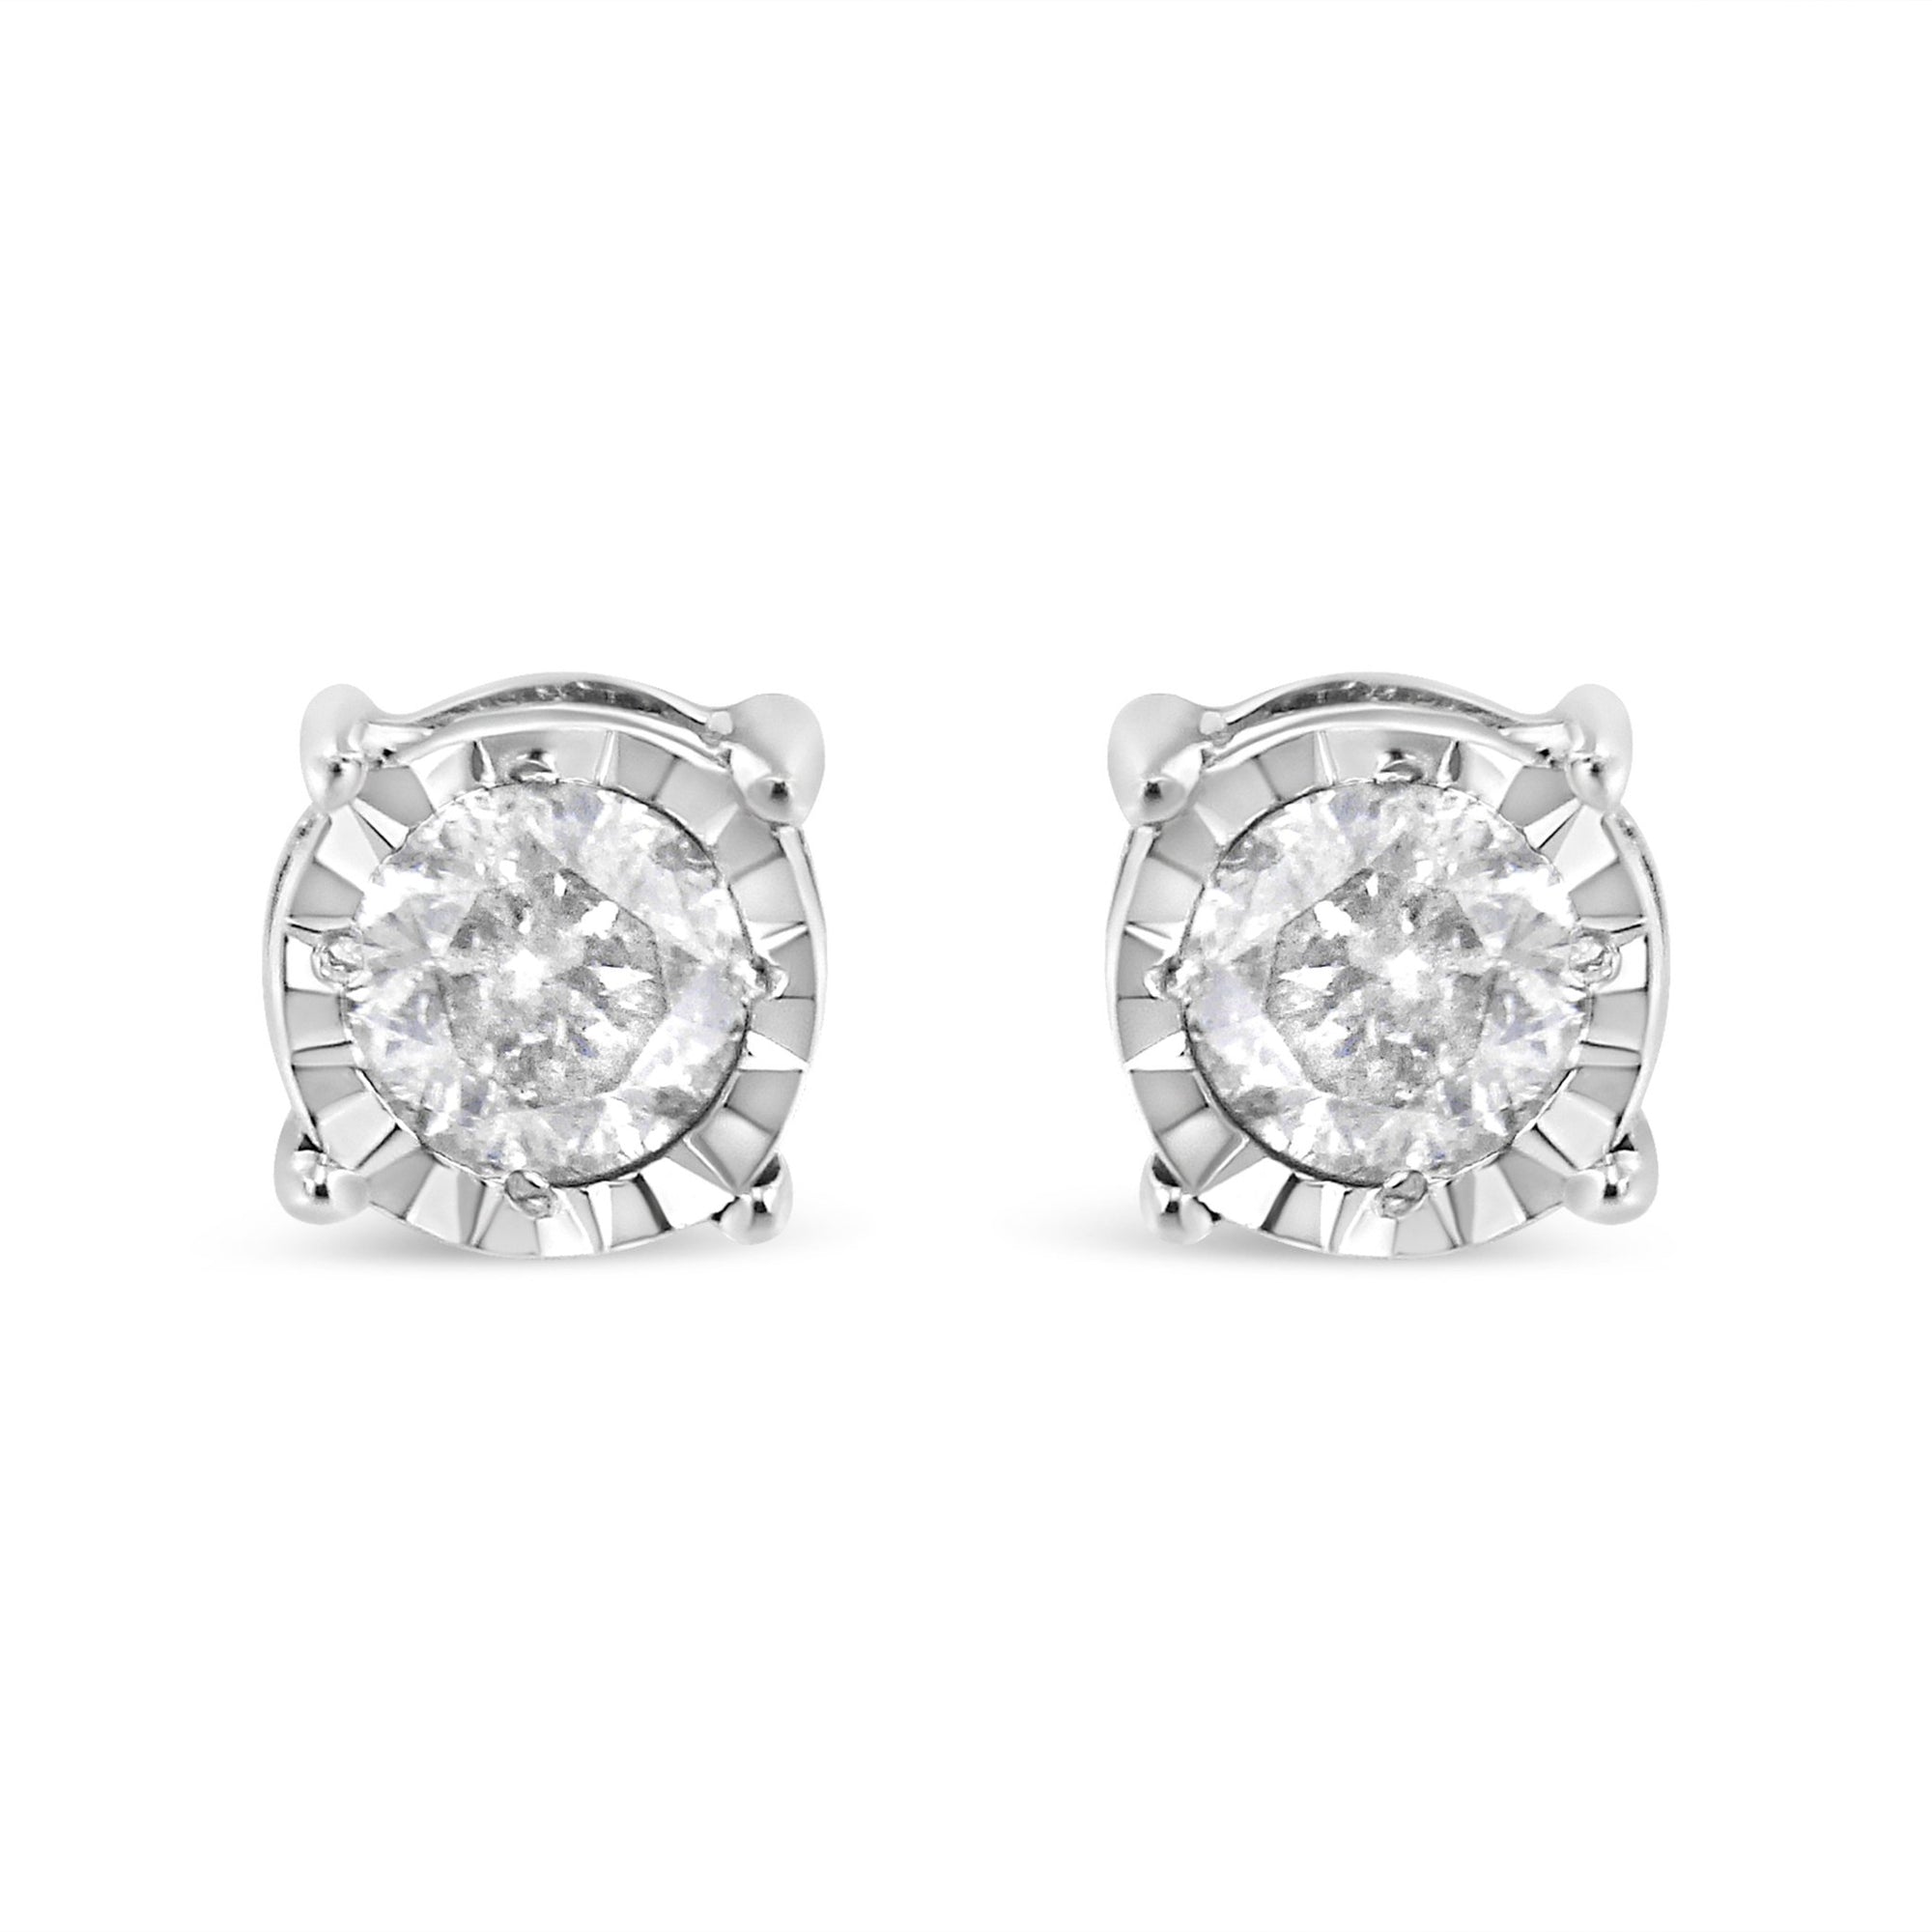 .925 Sterling Silver 3/8 Cttw Miracle-Set Round Brilliant Cut Diamond Solitaire Stud Earrings (K-L Color, I2-I3 Clarity) - LinkagejewelrydesignLinkagejewelrydesign